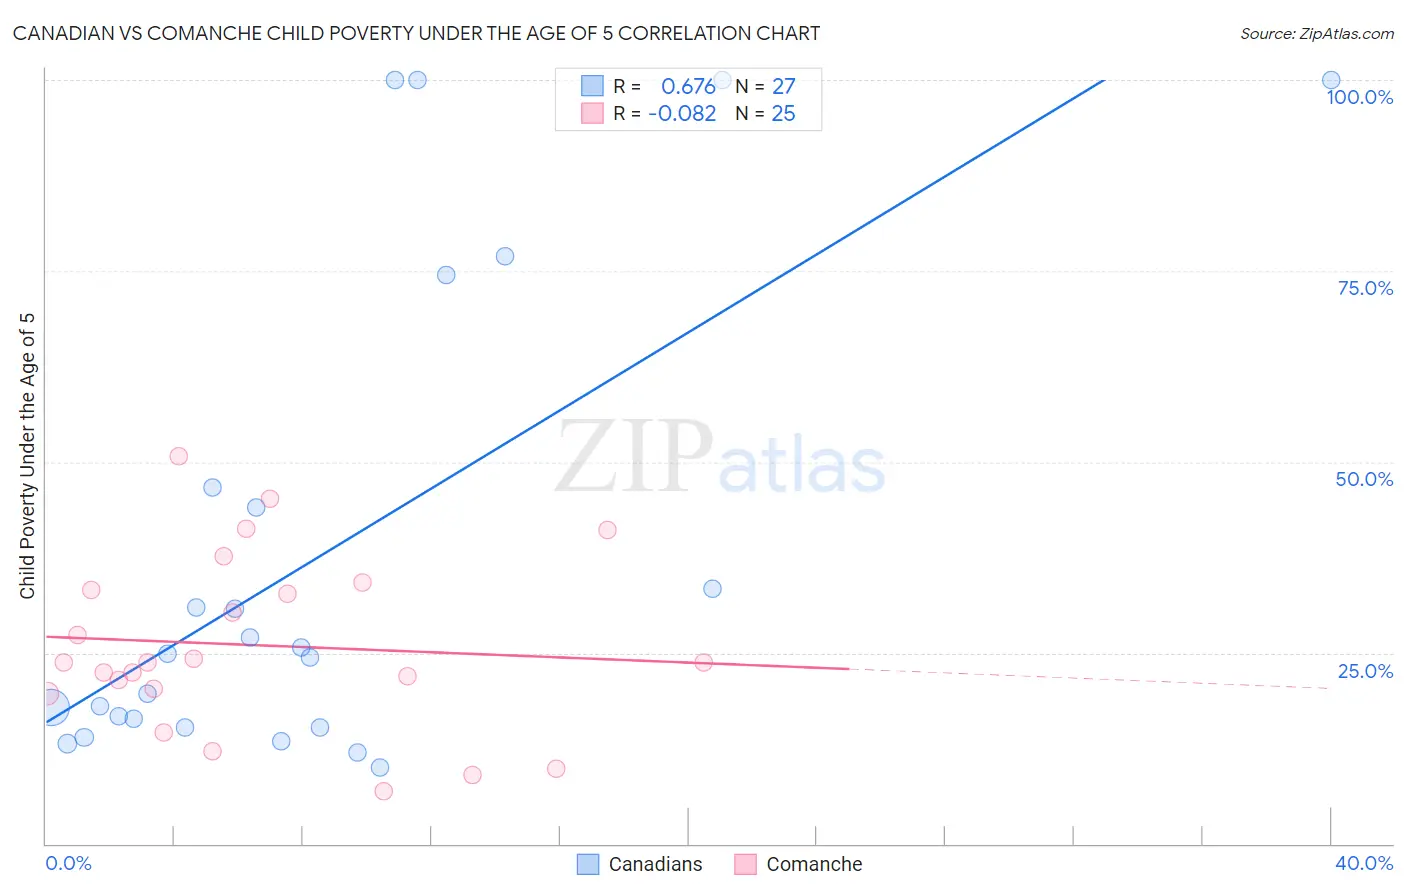 Canadian vs Comanche Child Poverty Under the Age of 5